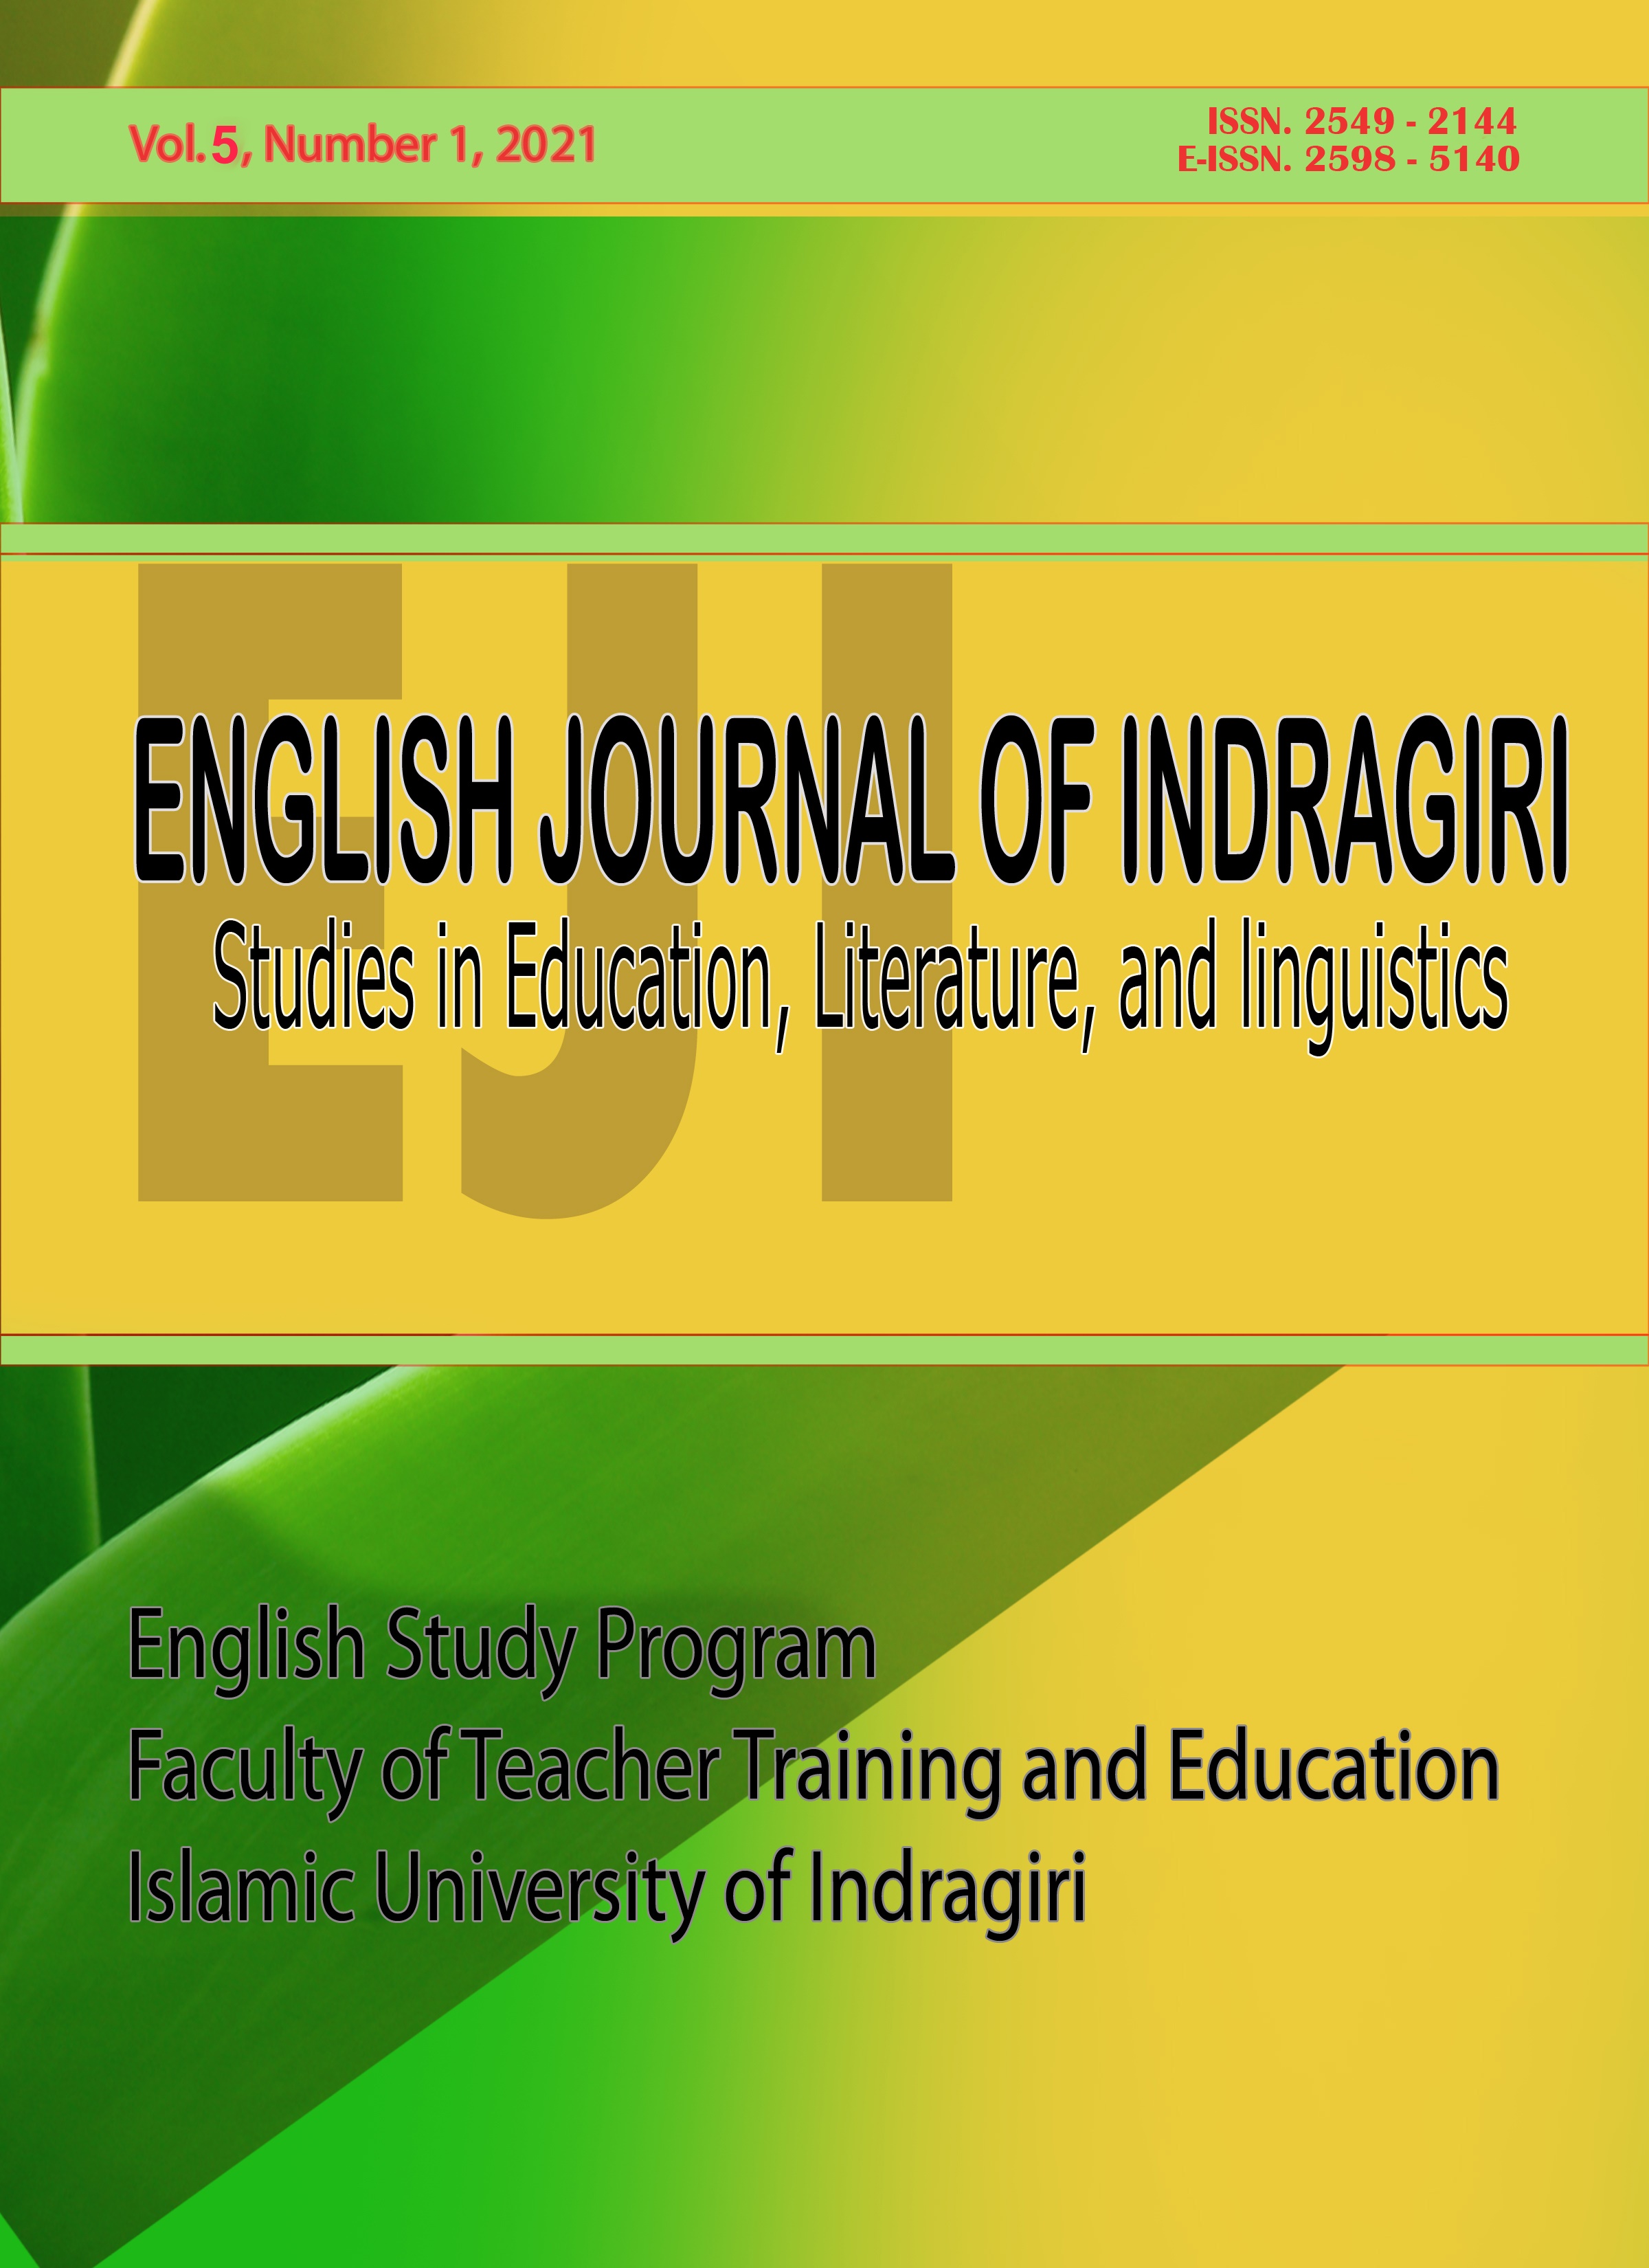 					View Vol. 5 No. 1 (2021): EJI (English Journal of Indragiri): Studies in Education, Literature, and Linguistics
				